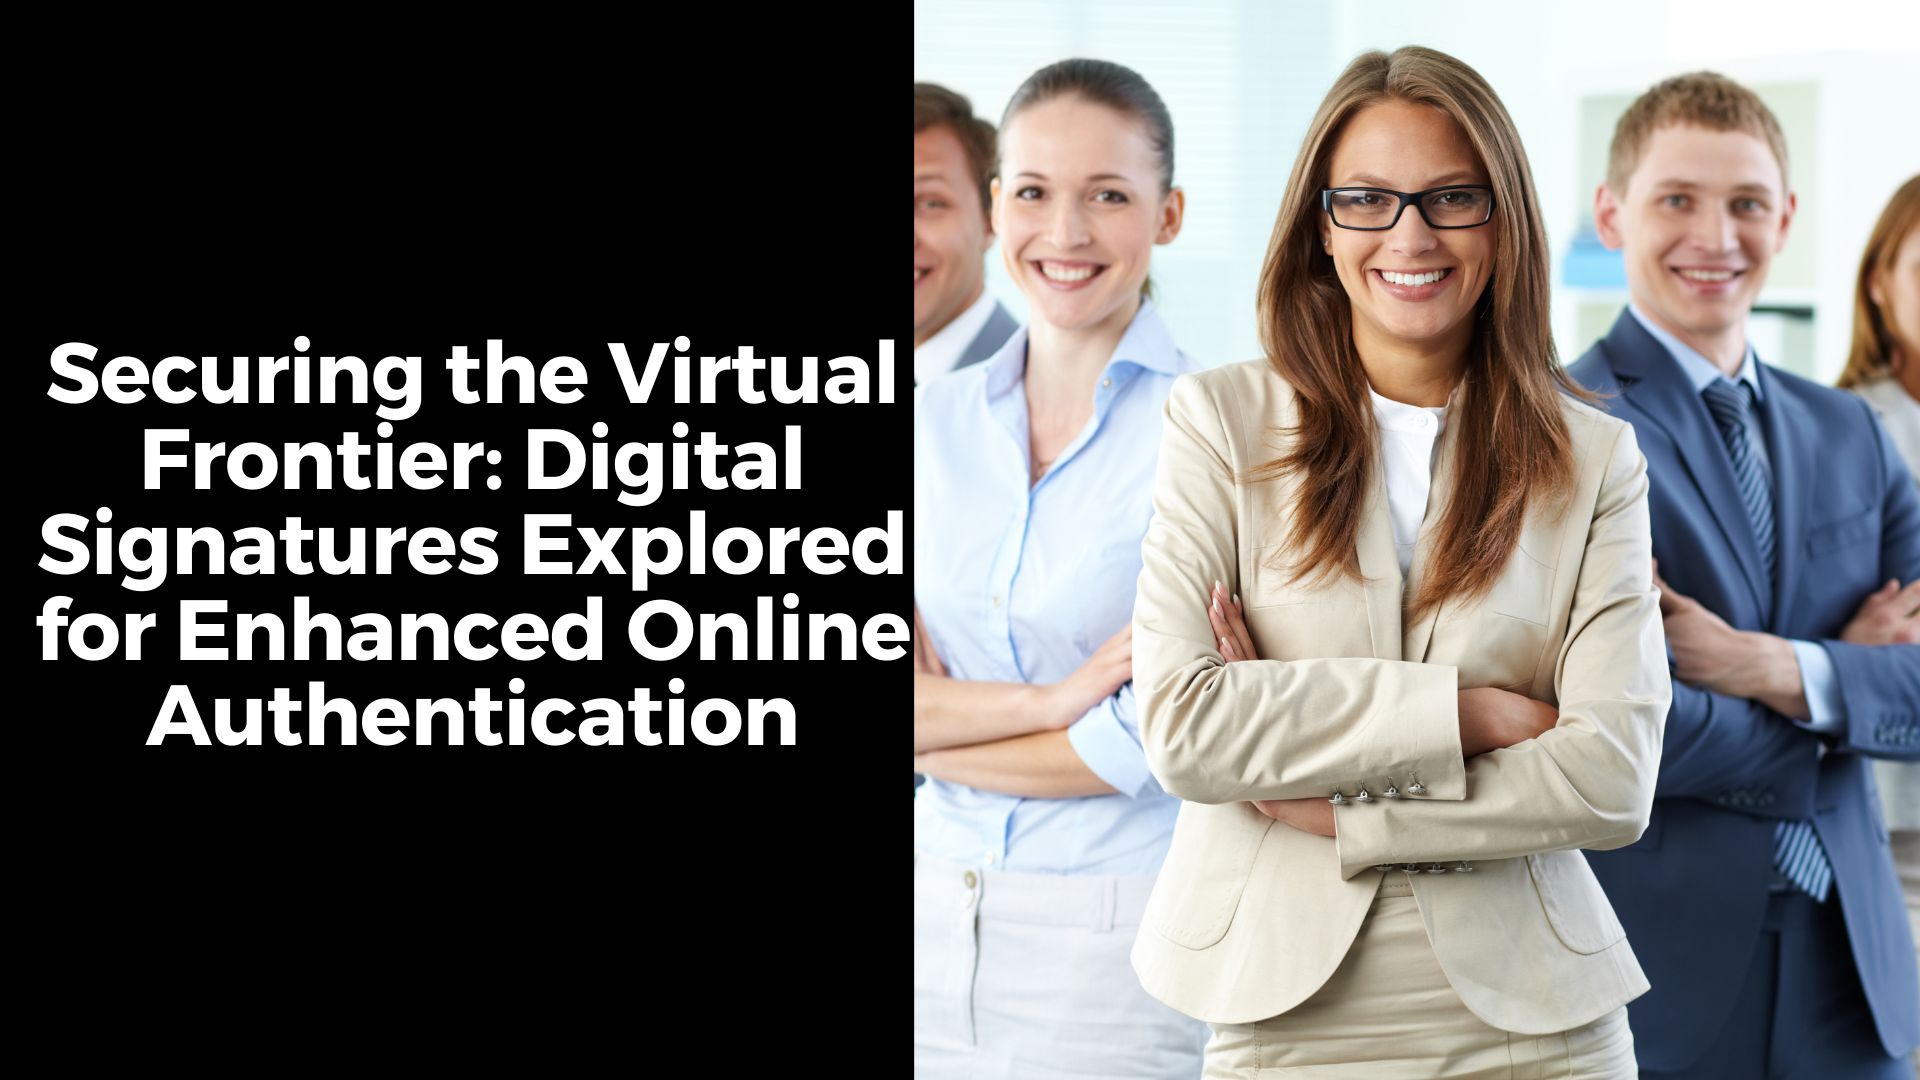 Securing the Virtual Frontier: Digital Signatures Explored for Enhanced Online Authentication